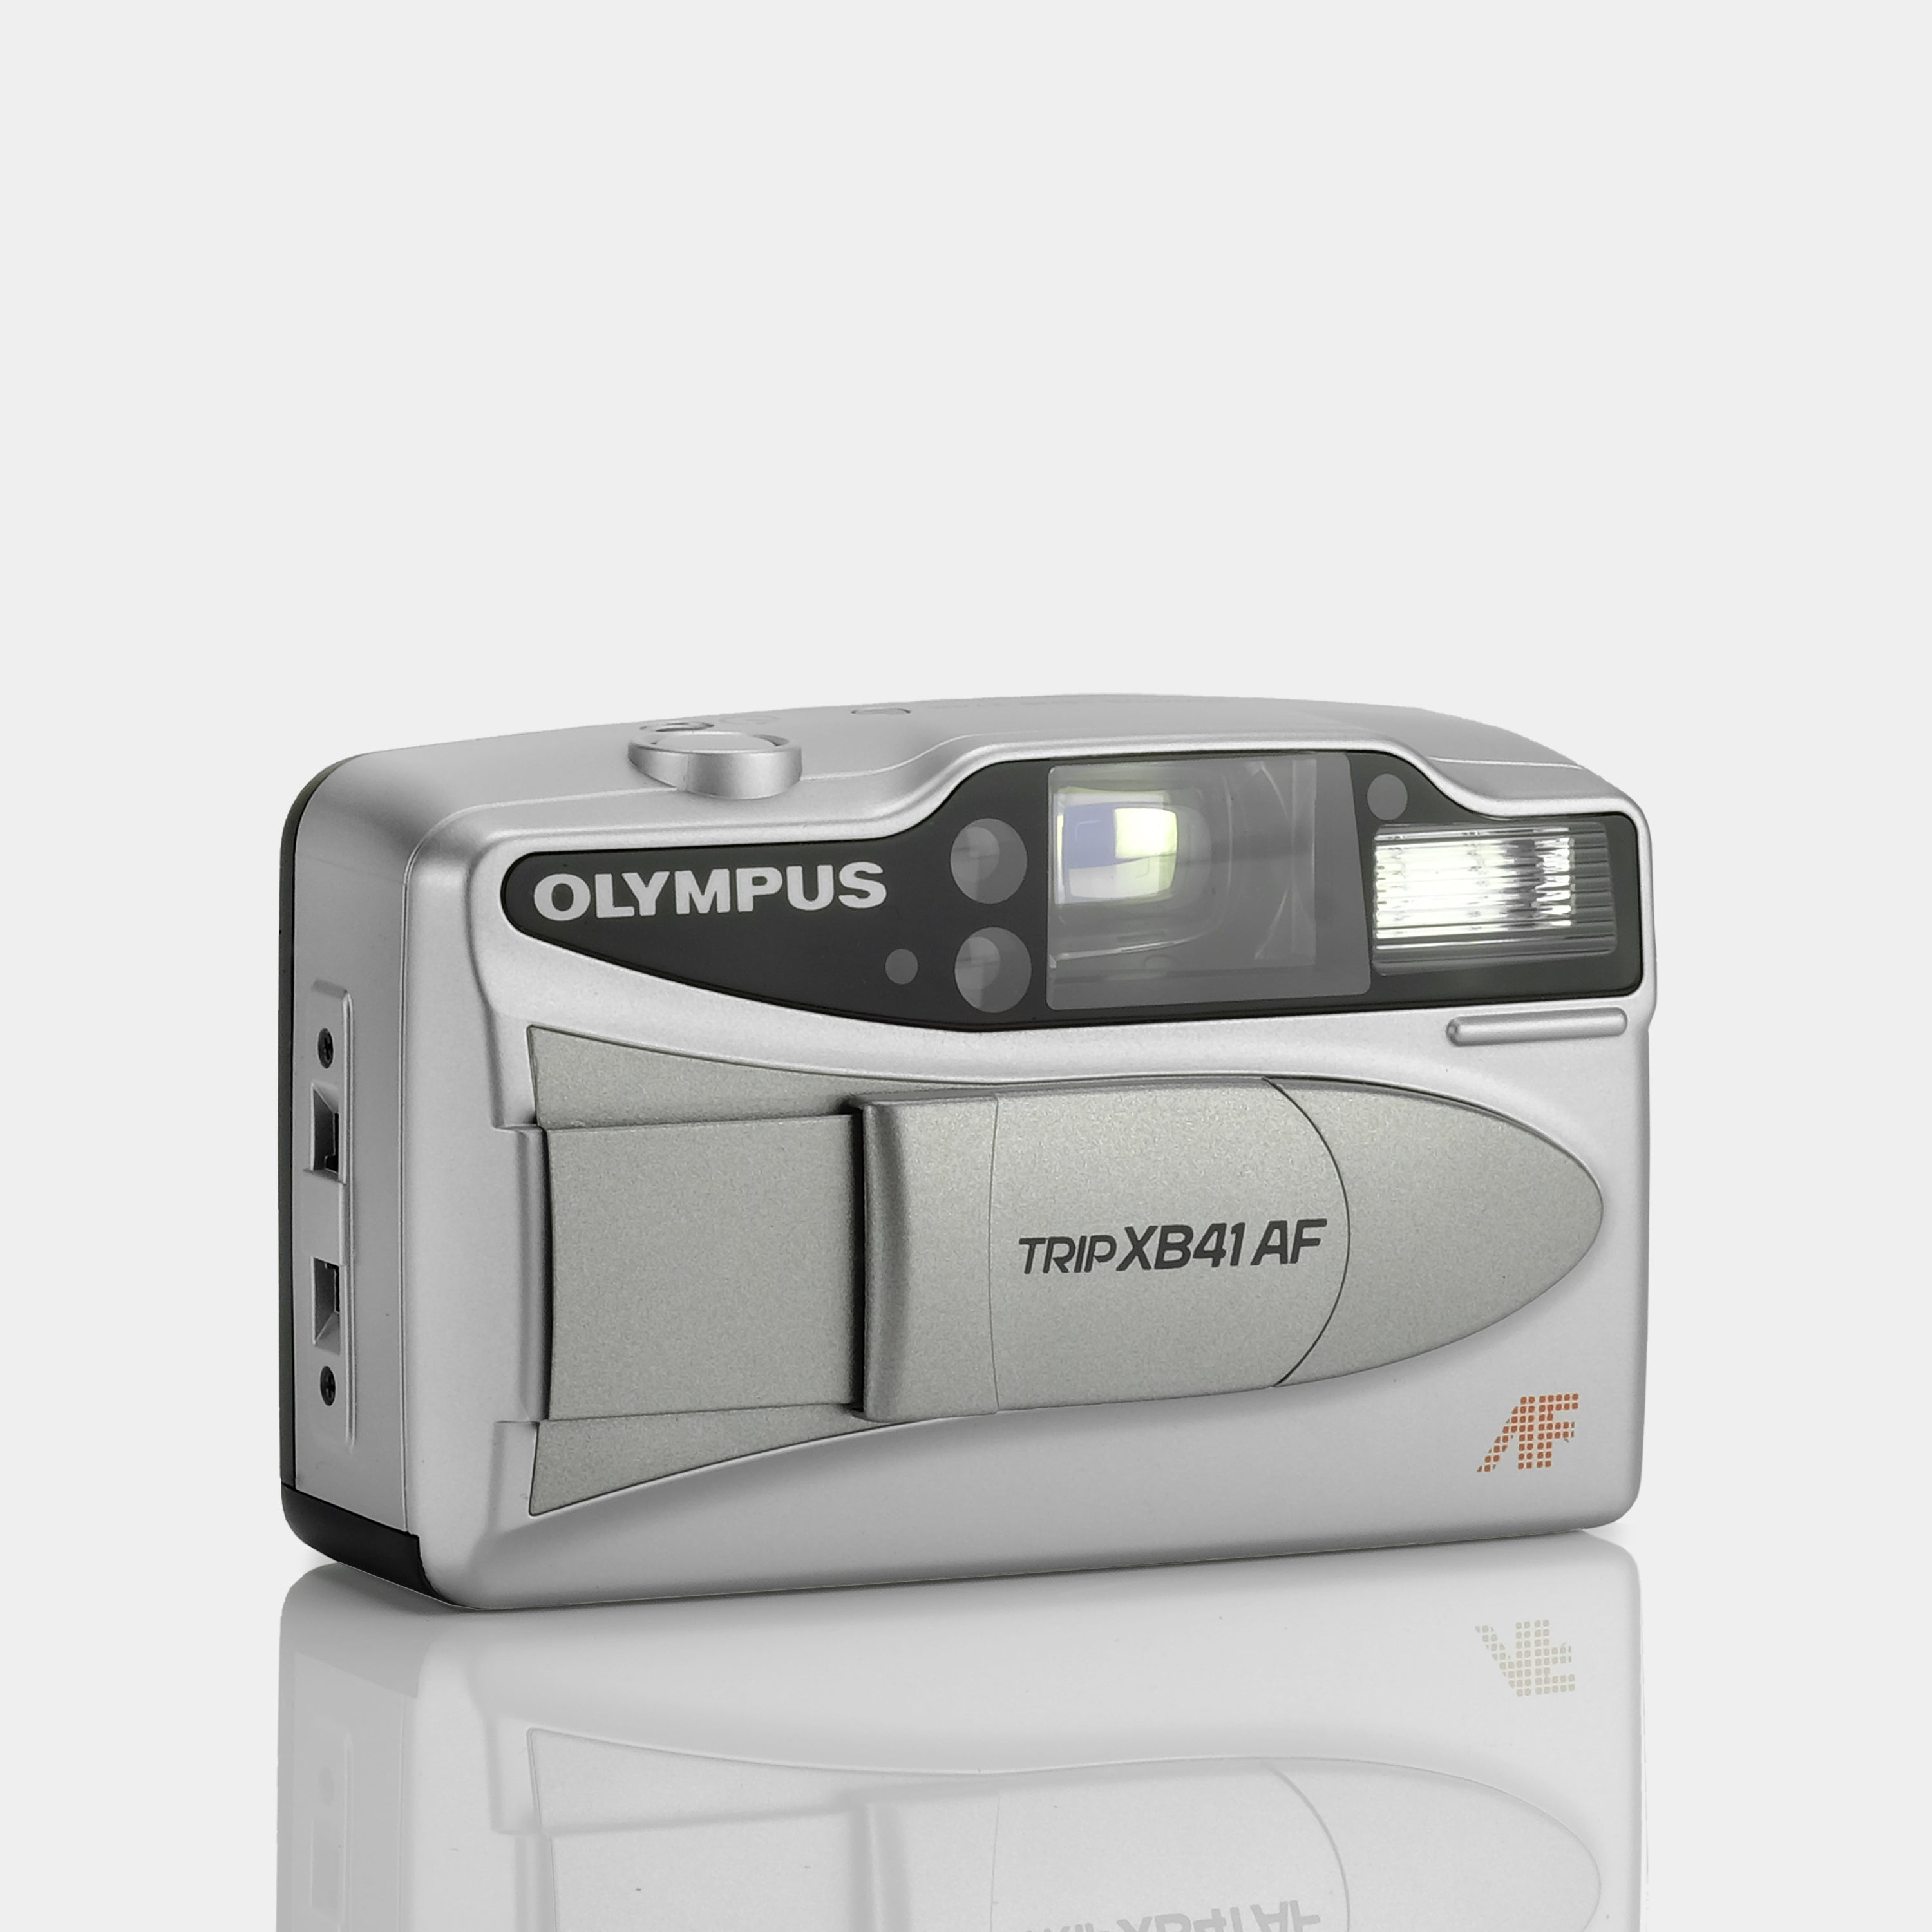 Olympus Trip XB41 AF 35mm Point And Shoot Film Camera (New Old Stock)